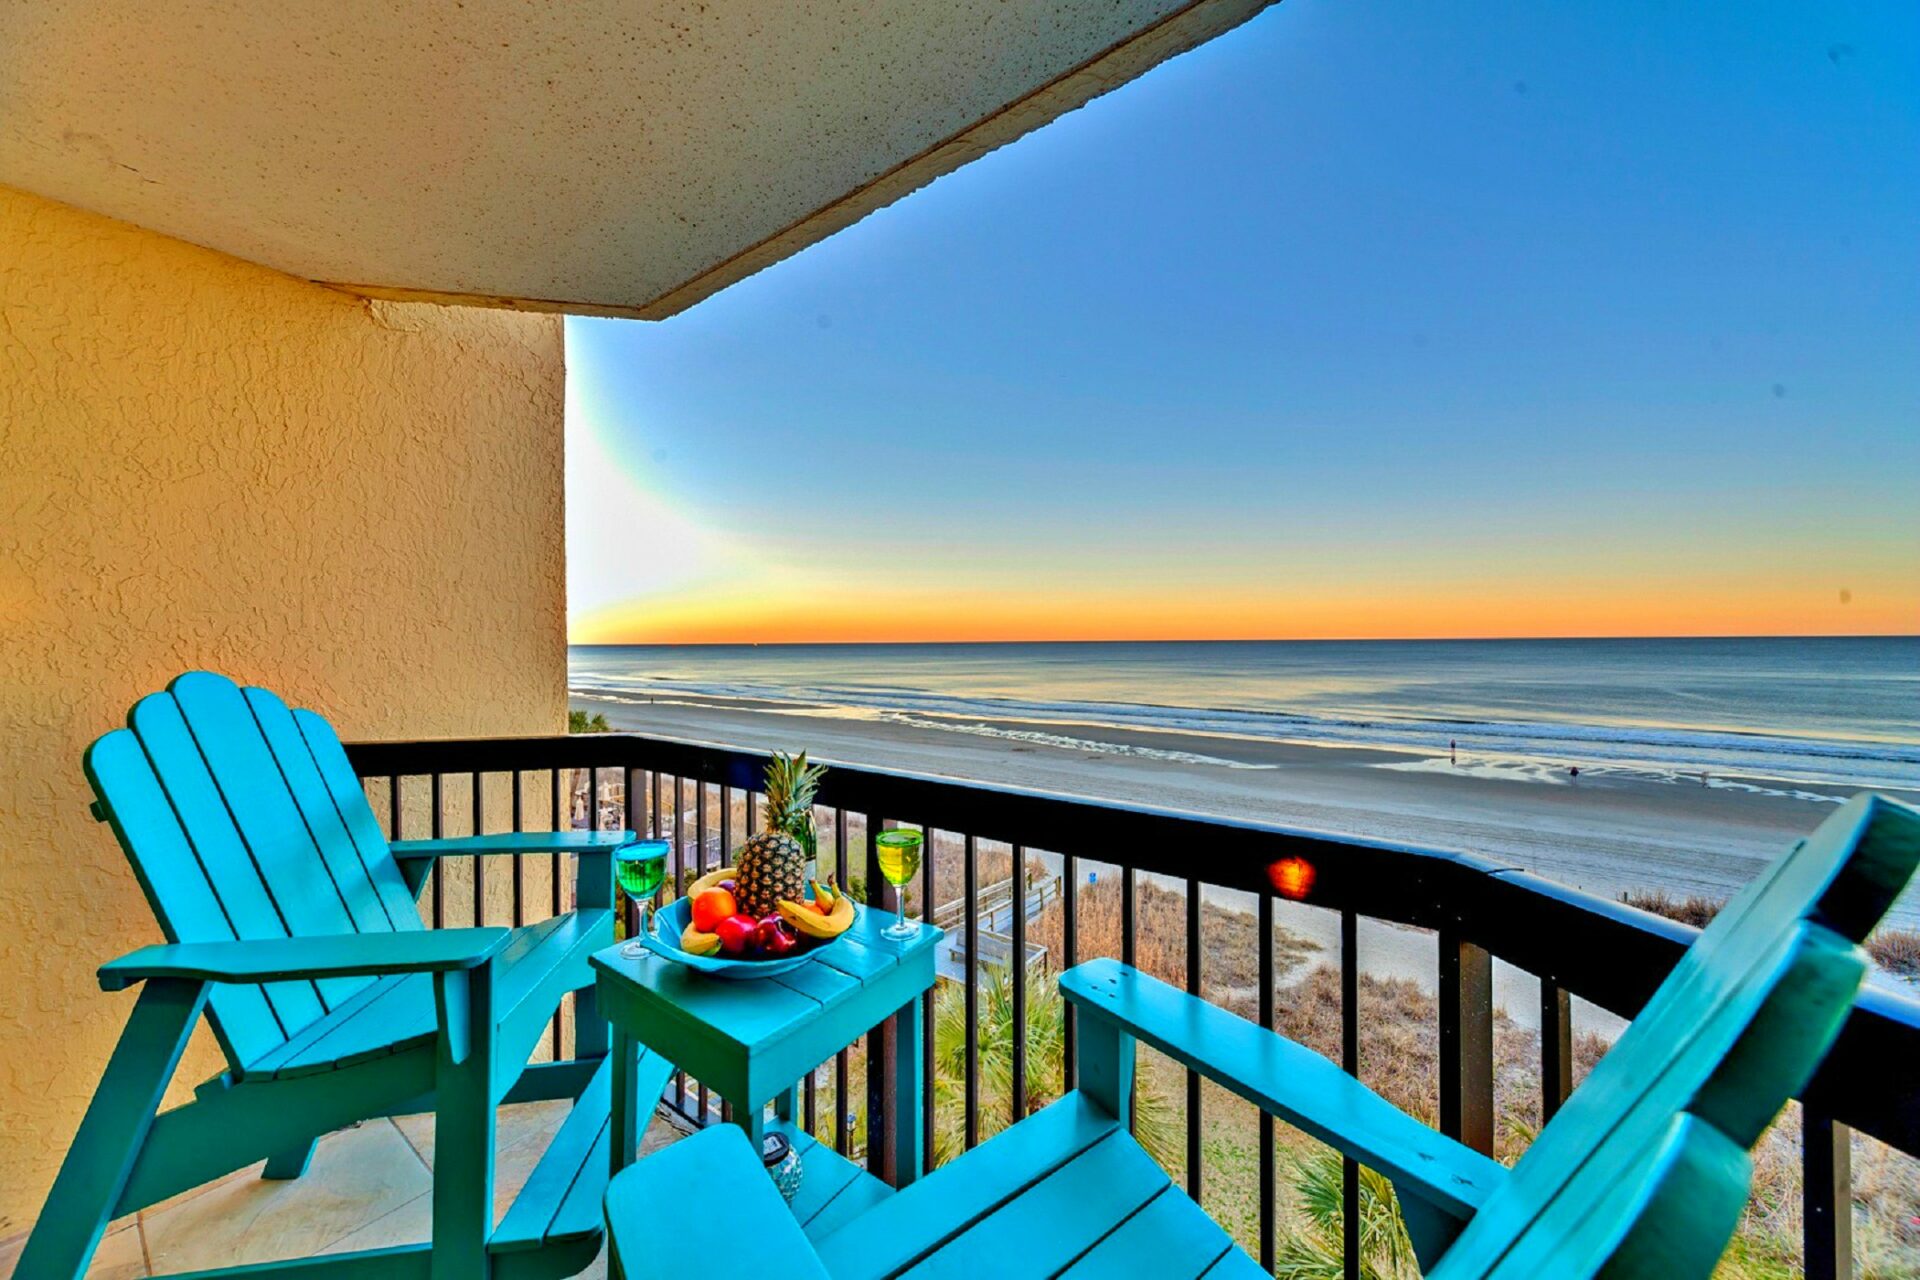 Pinnacle Oceanfront Tower 452 balcony overlooking the beach